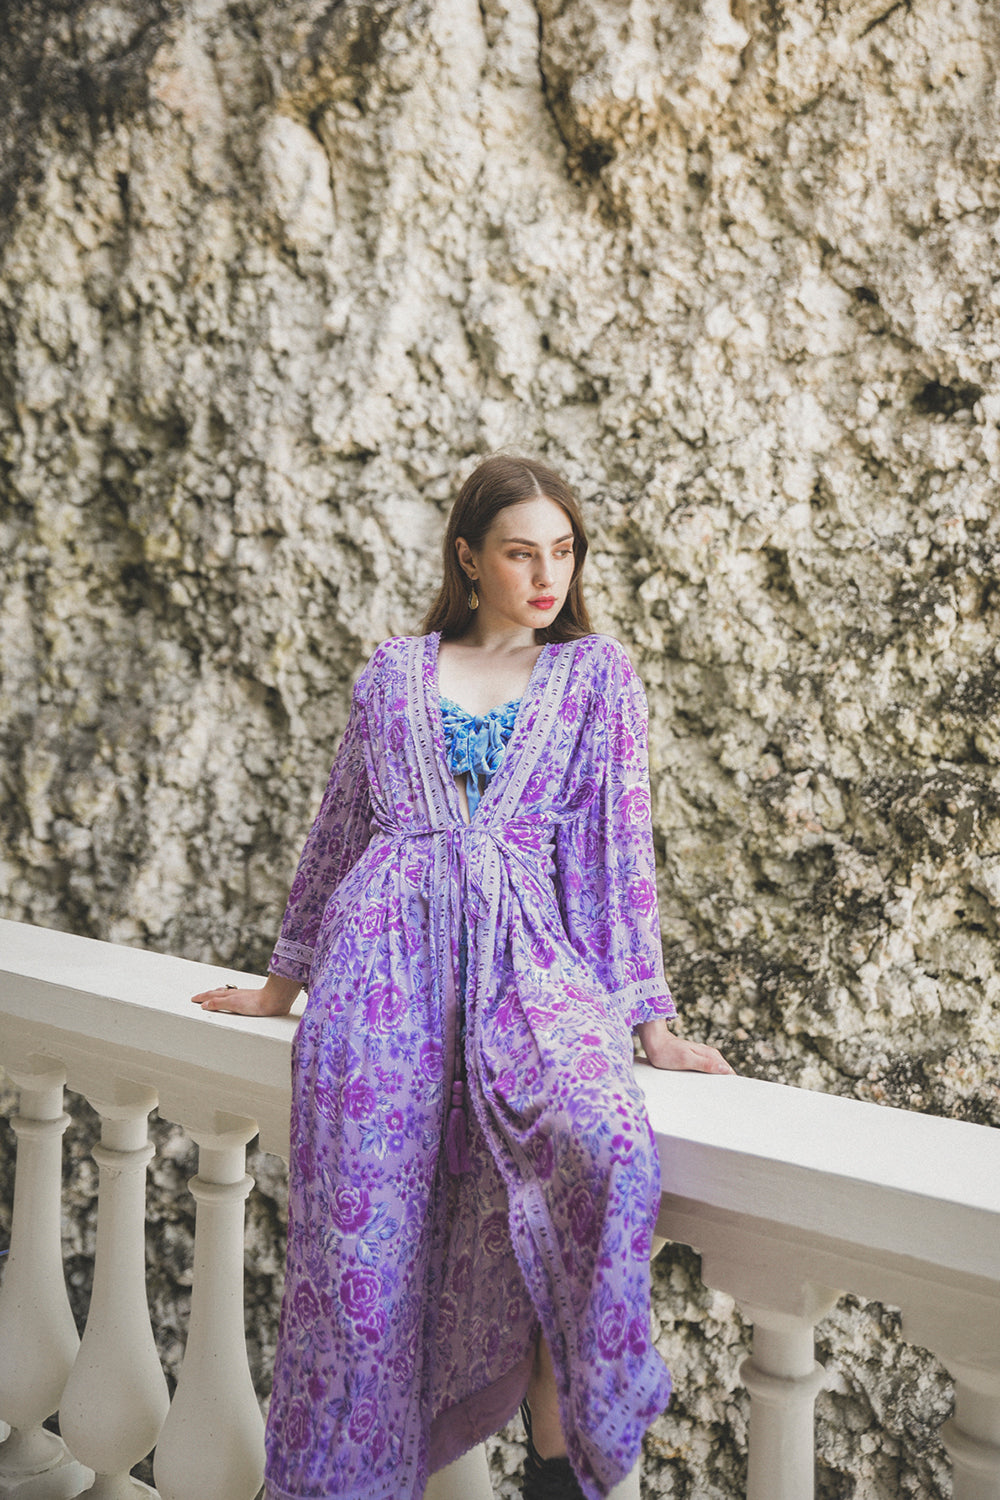 Elevate your at-home style with the Peony Long Robe, a modern boho kimono from Tulle and Batiste's Peony collection, handmade by Balinese artisans with ethical standards